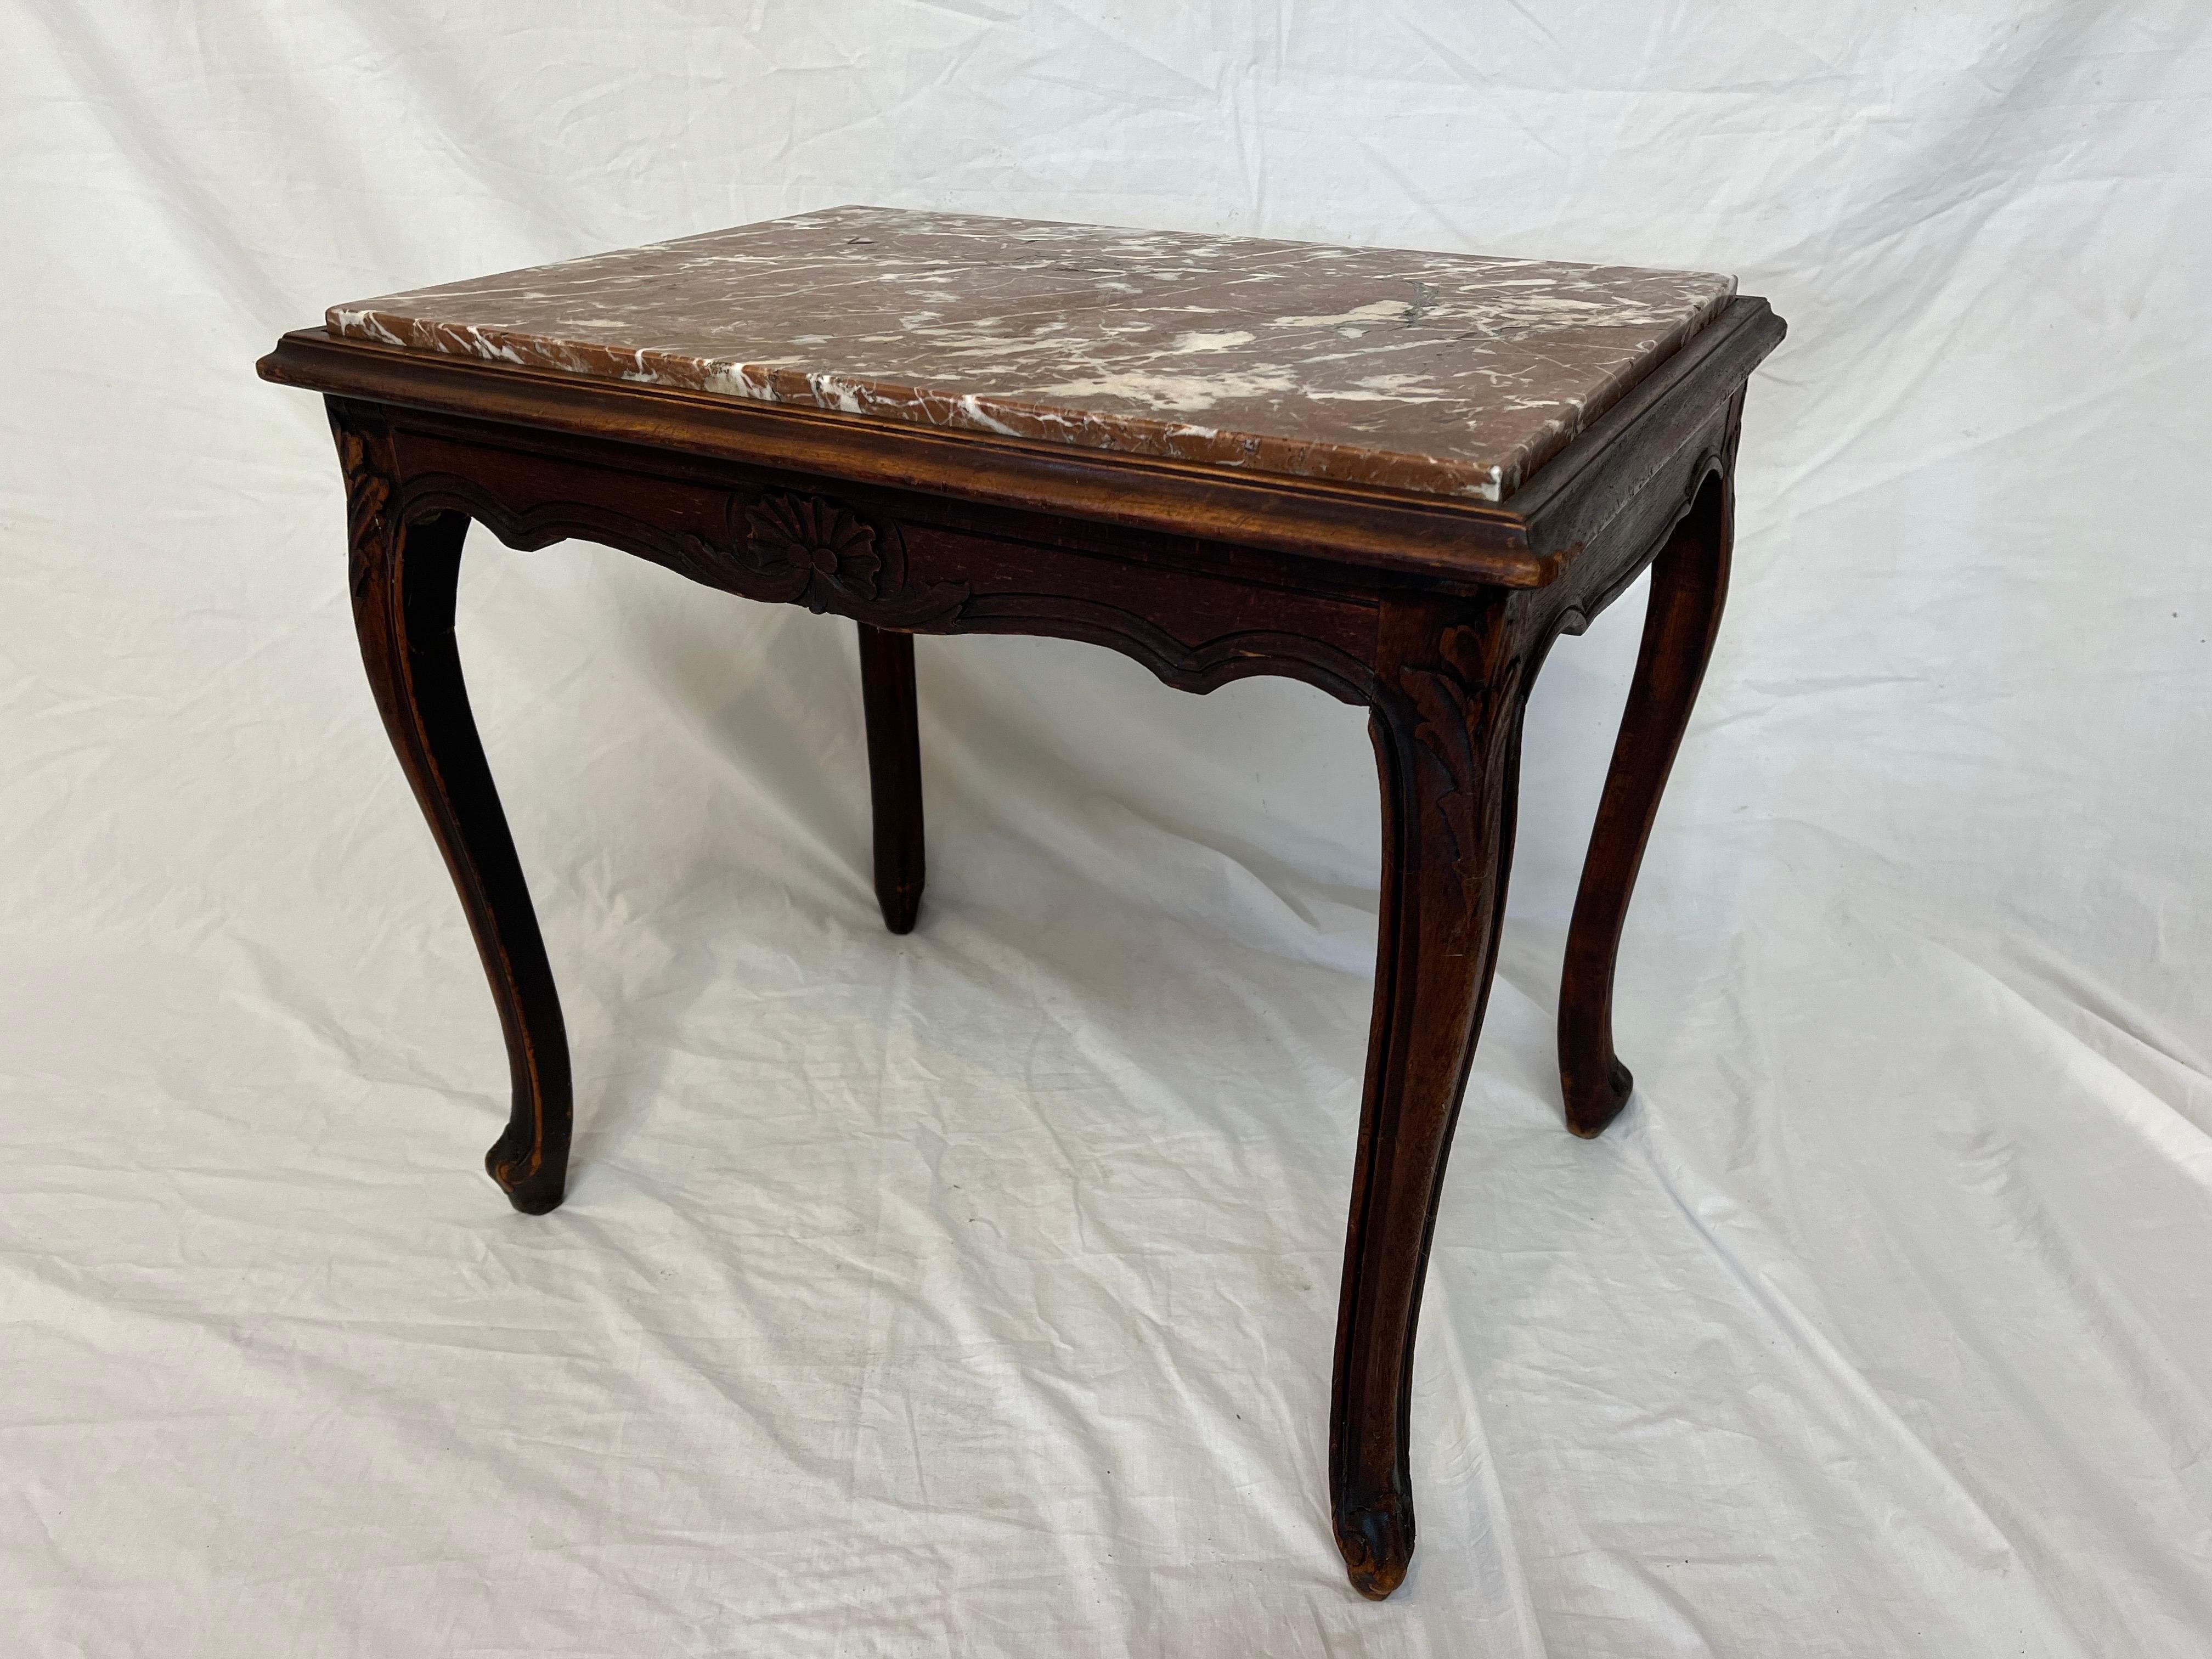 A timeless and beautiful Belgian Louis XV style rouge topped marble side table. The table features lovely carved details on all four sides. With stylized shell and foliate motifs on the wave like aprons and corners, gently flowing cabriole legs and